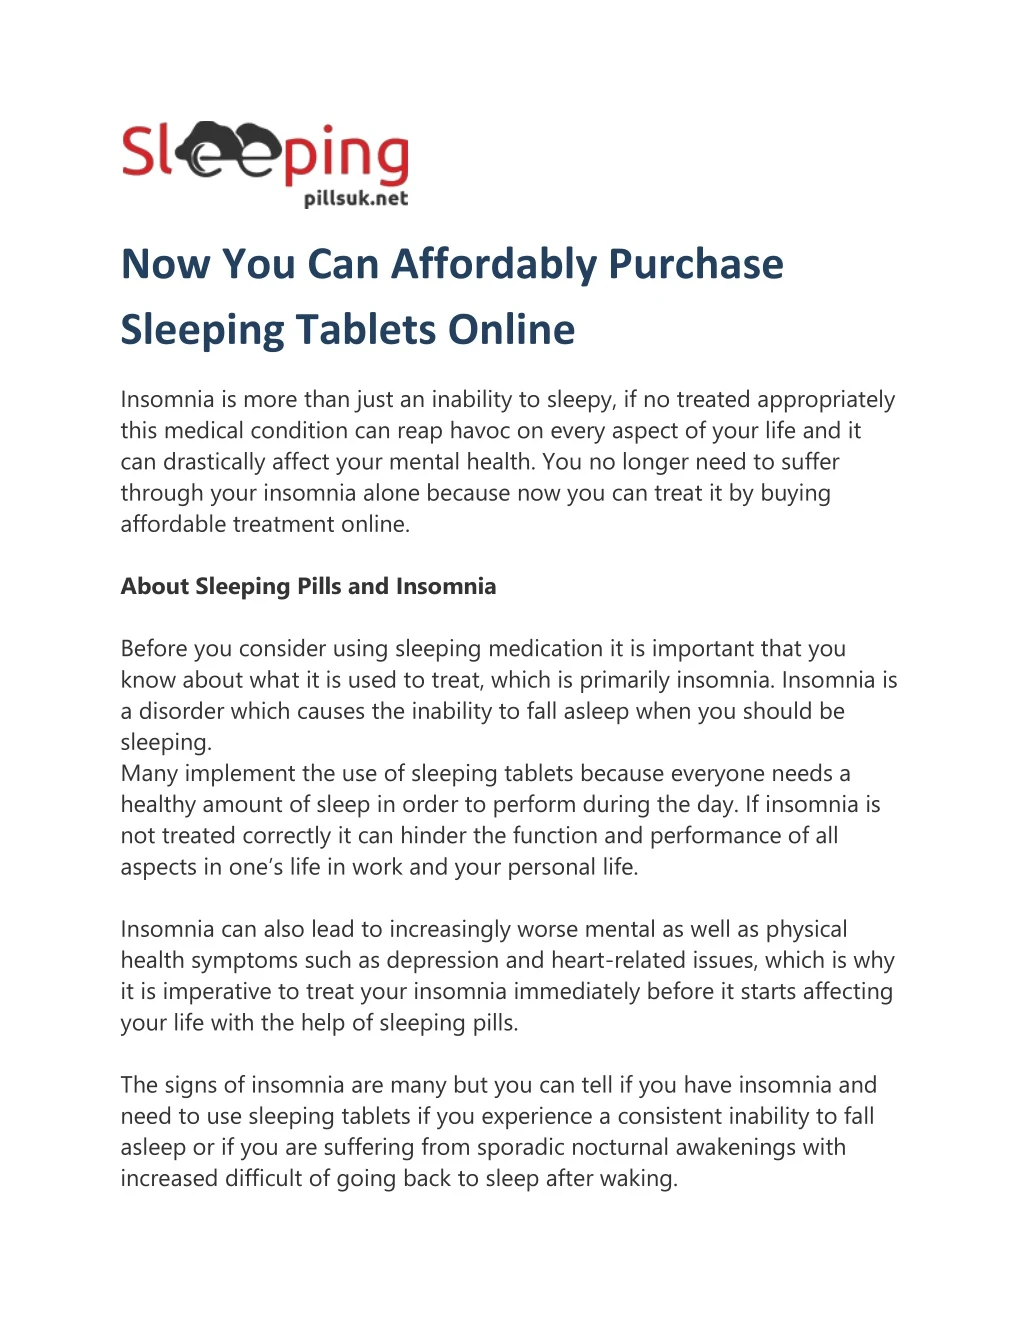 now you can affordably purchase sleeping tablets